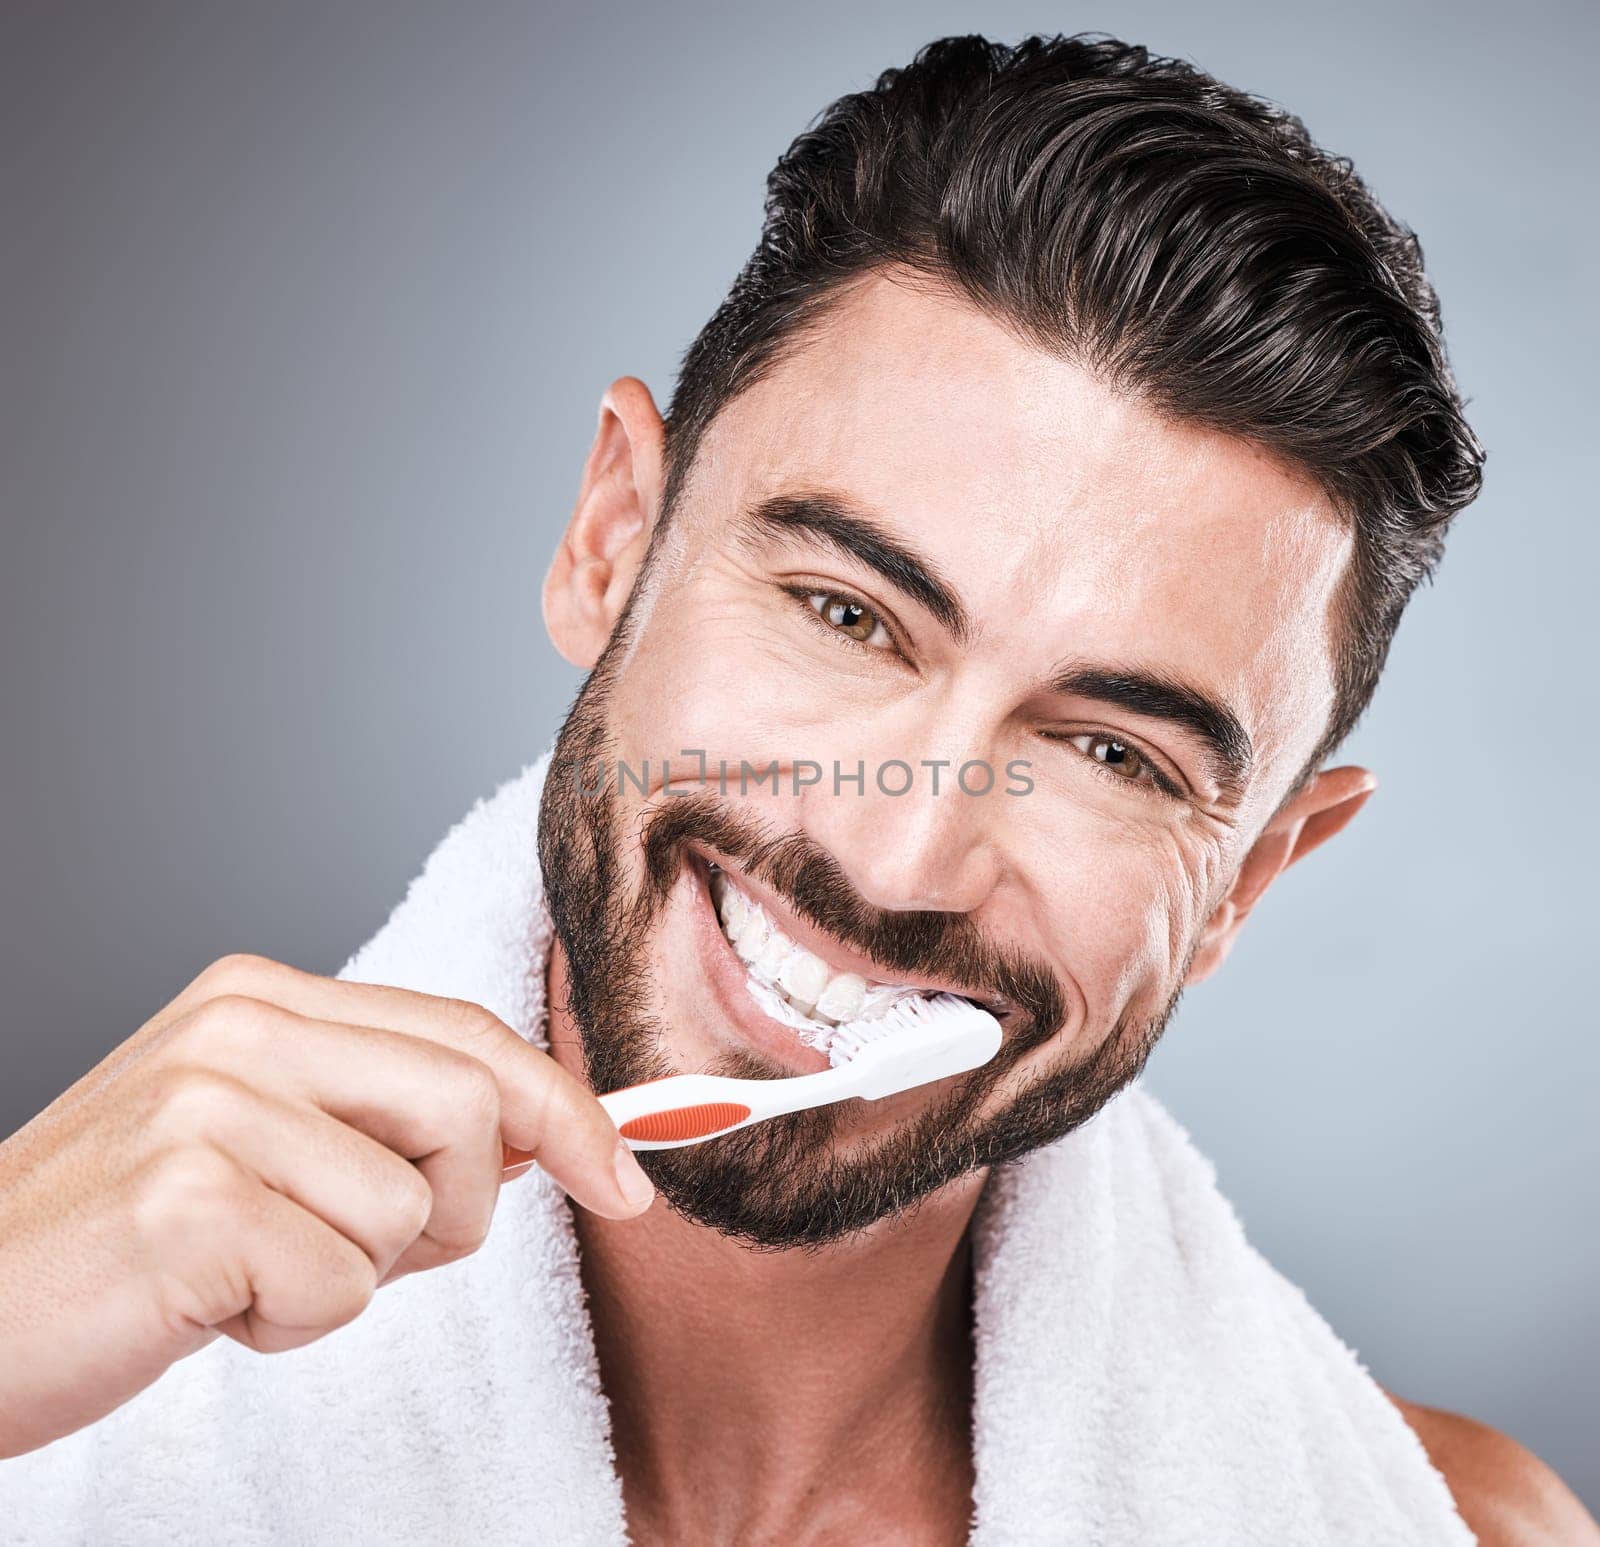 Brushing teeth, studio portrait and man with toothbrush, dental wellness and healthy mouth care. Happy face, male model and oral cleaning for fresh breath, smile and facial happiness with toothpaste.